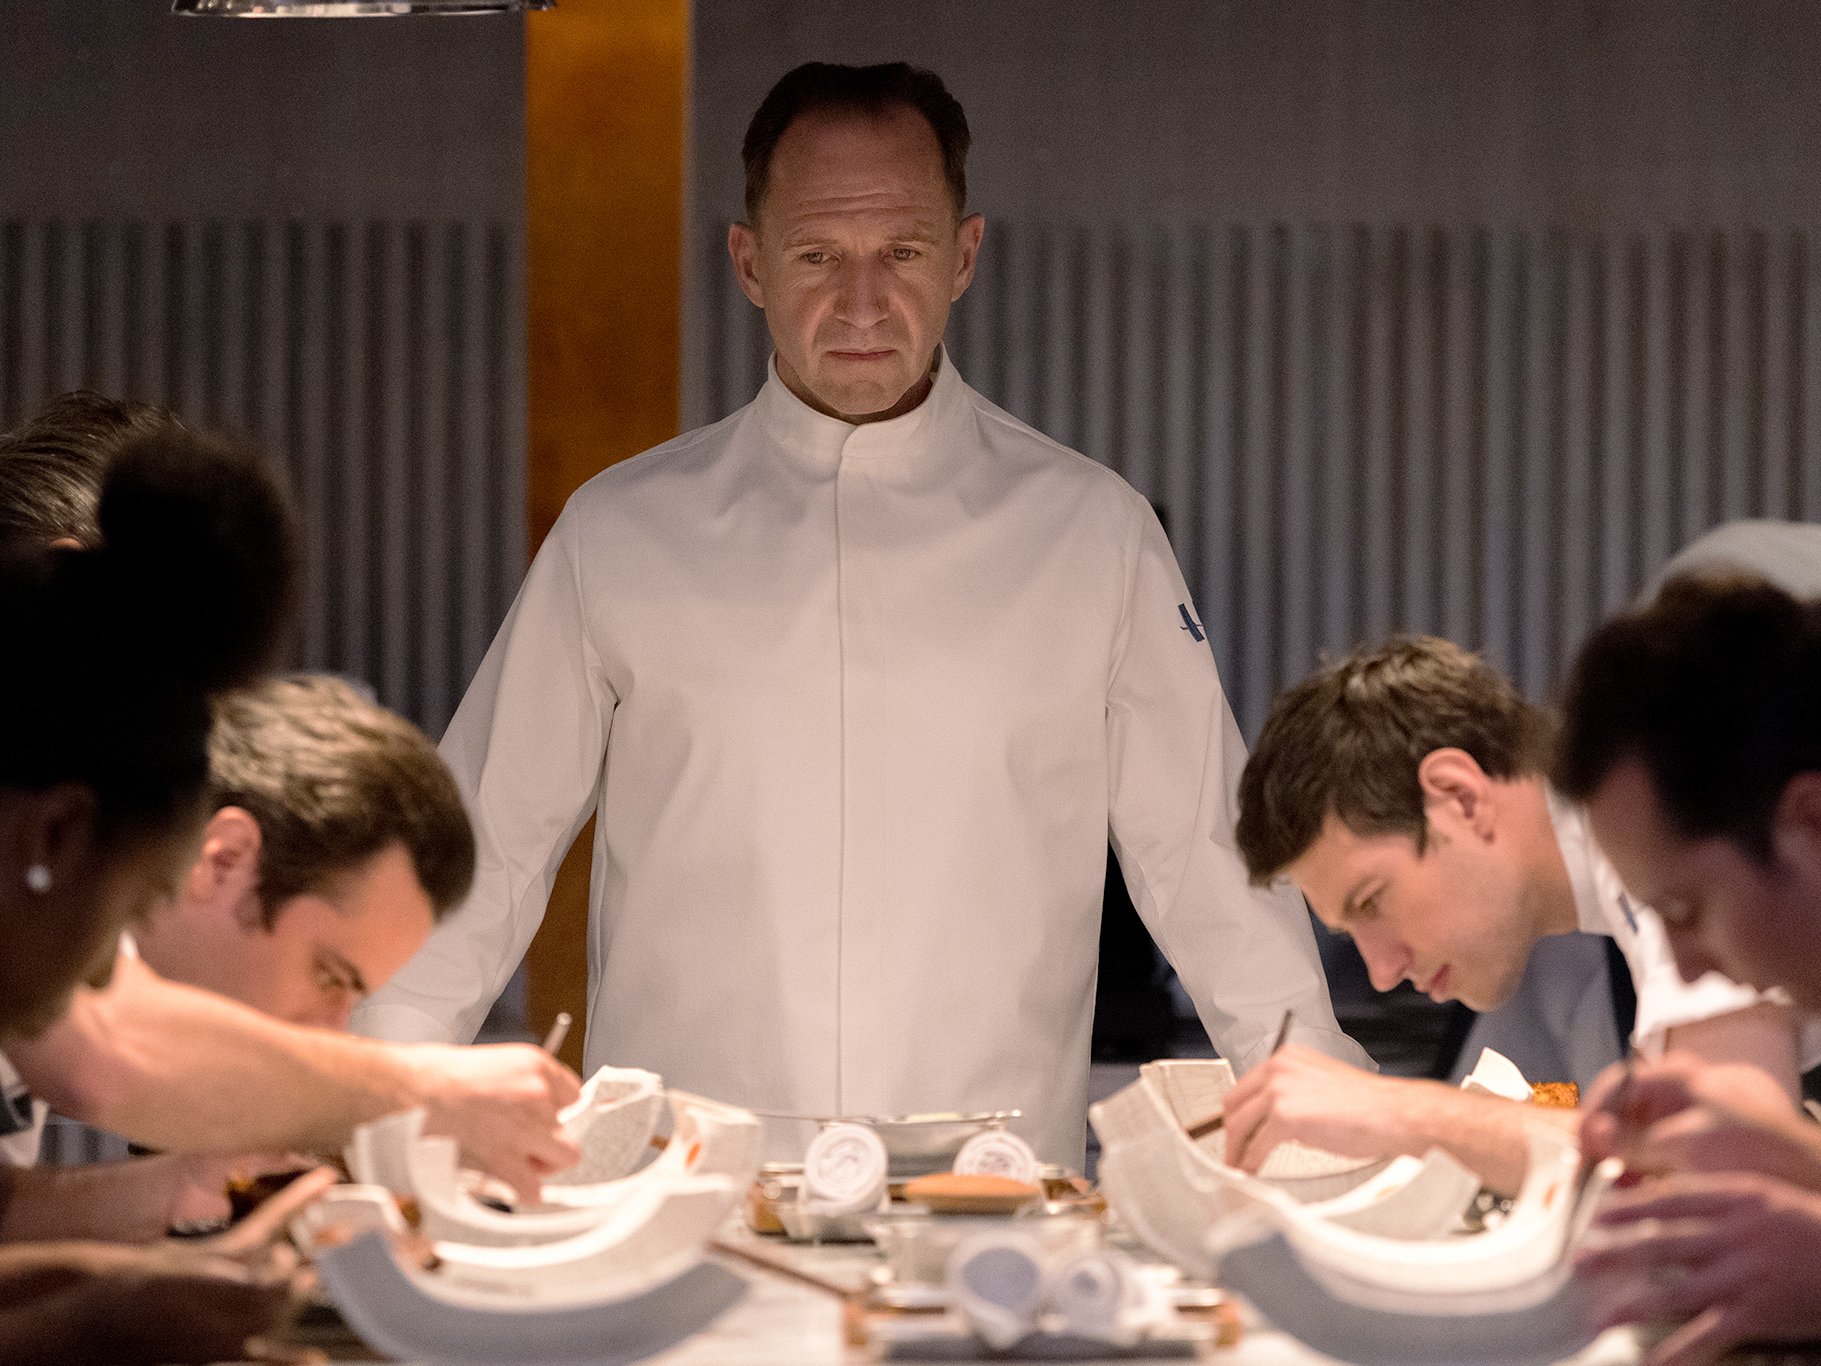 Ralph Fiennes frightens as Master Chef in The Menu.